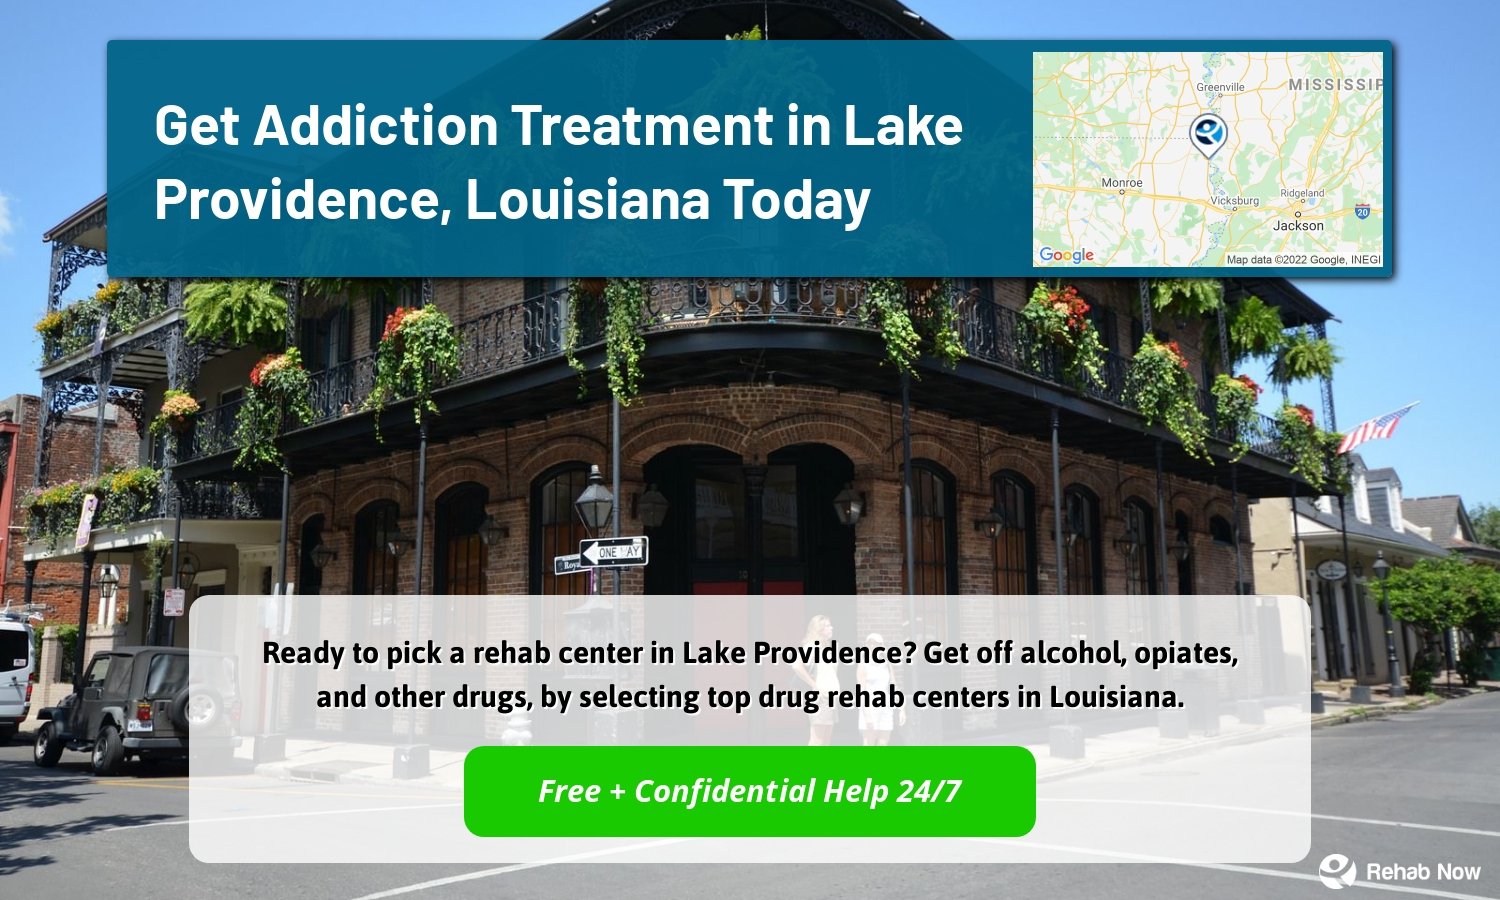 Ready to pick a rehab center in Lake Providence? Get off alcohol, opiates, and other drugs, by selecting top drug rehab centers in Louisiana.